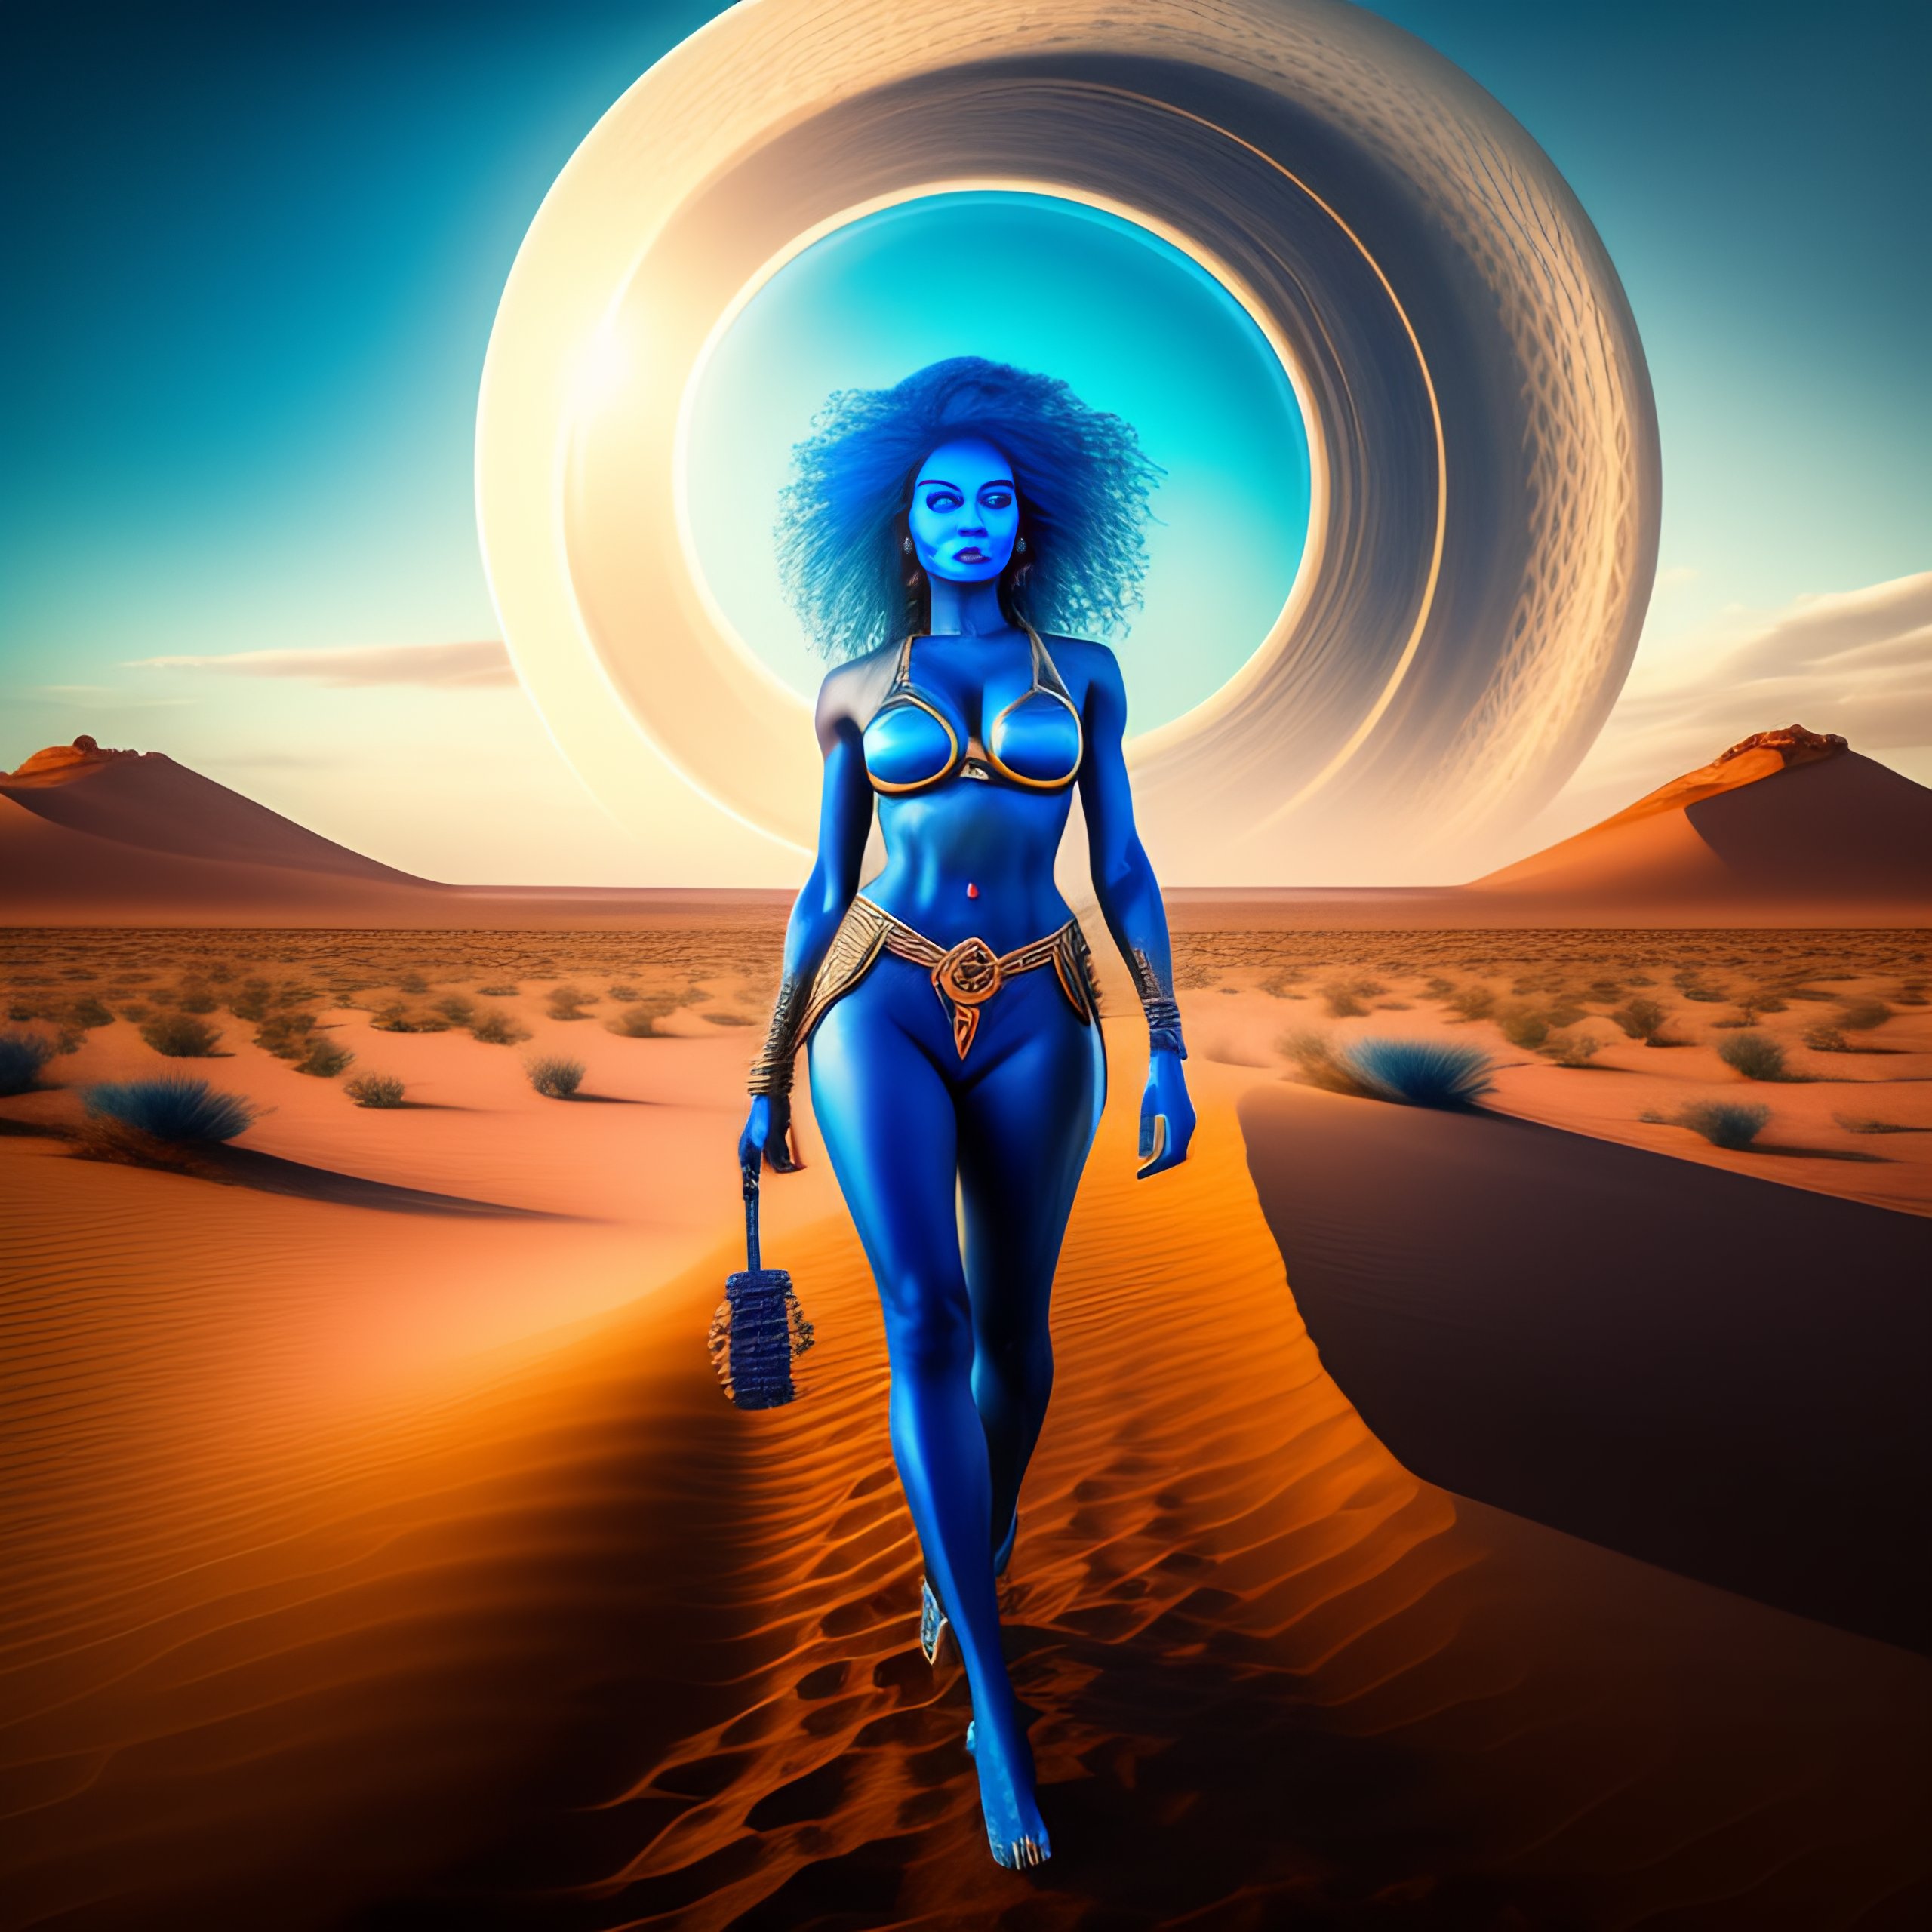 Lexica Lovely Alien Women With Blue Skin Has A Desert Journey With Footprints In The Sand 